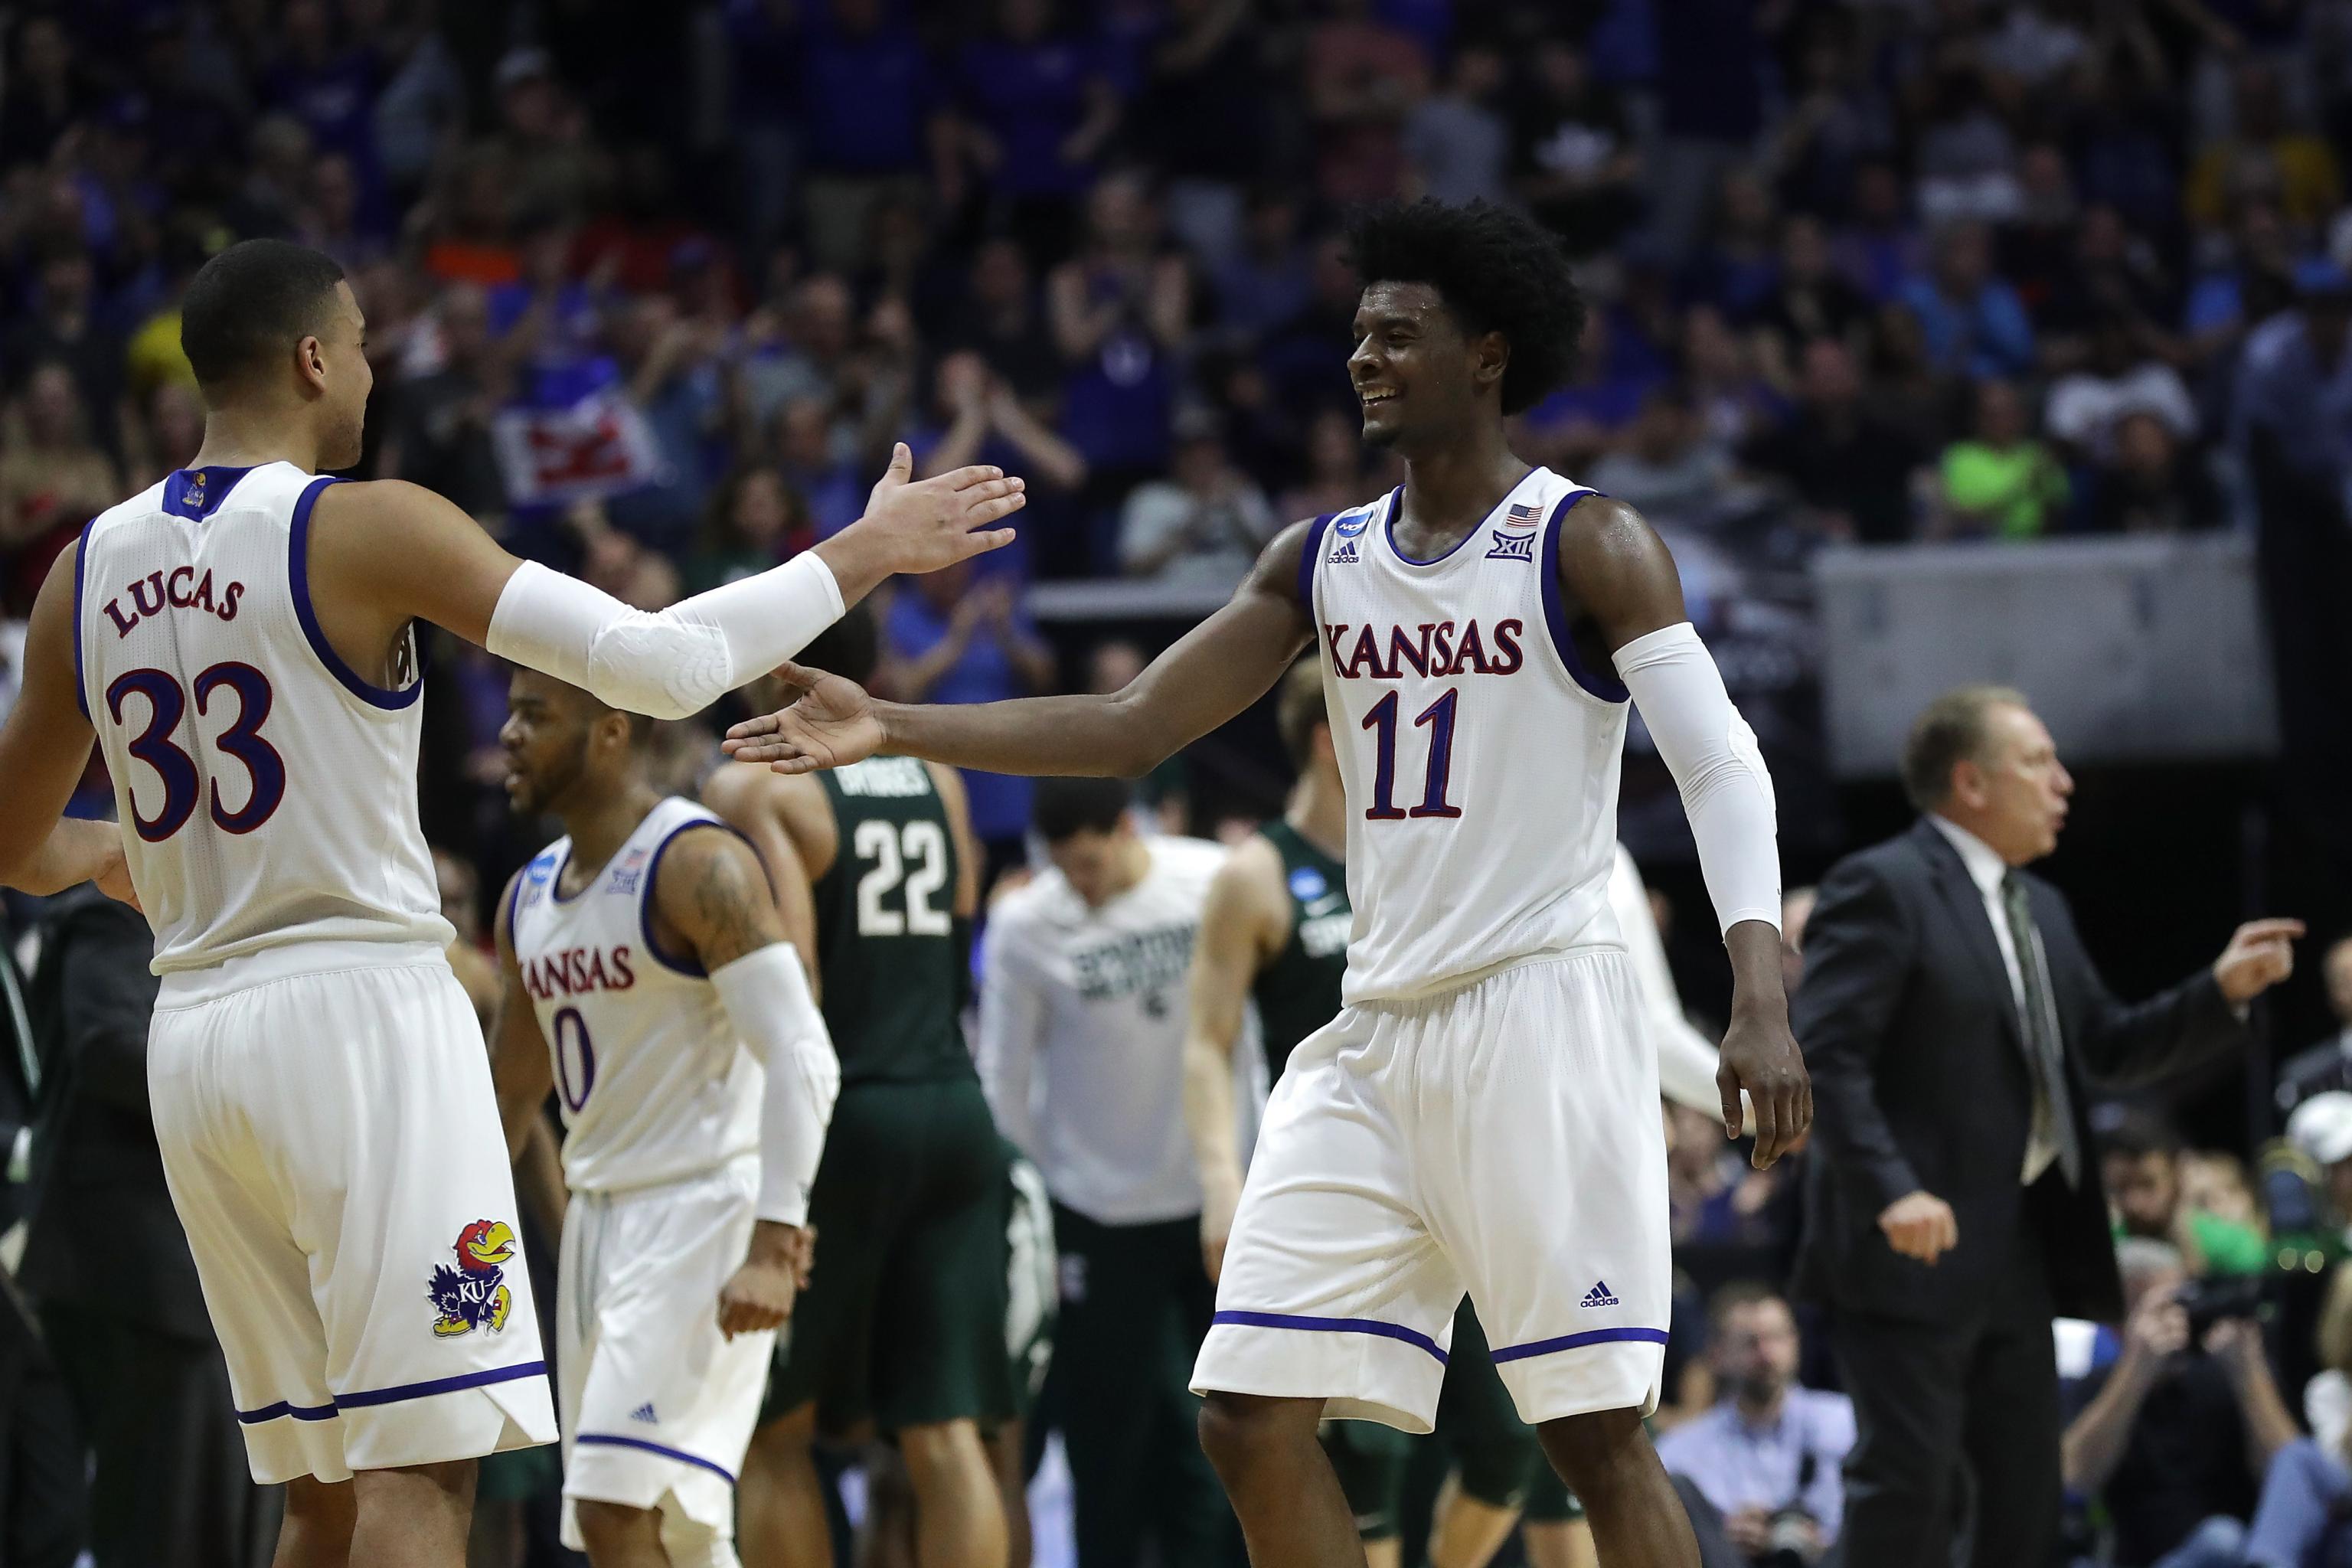 Kansas vs. Purdue March Madness Sweet 16 Preview and Prediction